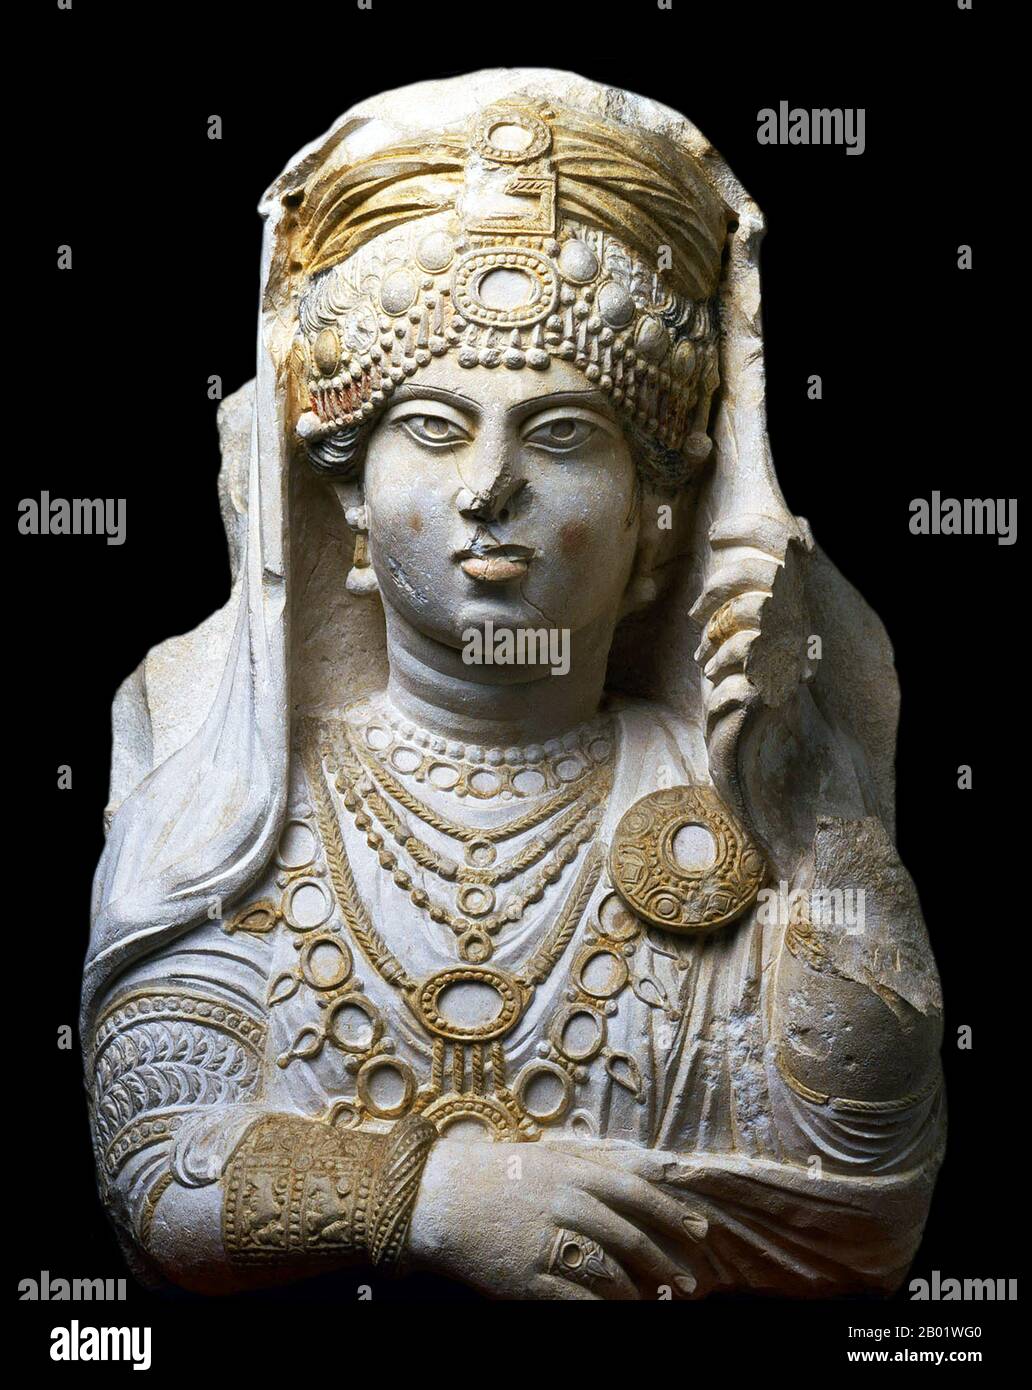 Syria: Limestone funerary bust of a woman known to posterity as 'The Beauty of Palmyra', c. 190-210 CE  Palmyra was an ancient city in Syria. It was an important city in central Syria, located in an oasis 215 km northeast of Damascus and 180 km southwest of the Euphrates at Deir ez-Zor. It had long been a vital caravan city for travellers crossing the Syrian desert and was known as the Bride of the Desert. The earliest documented reference to the city is by its Semitic name Tadmor, Tadmur or Tudmur (which means 'the town that repels' in Amorite and 'the indomitable town' in Aramaic). Stock Photo